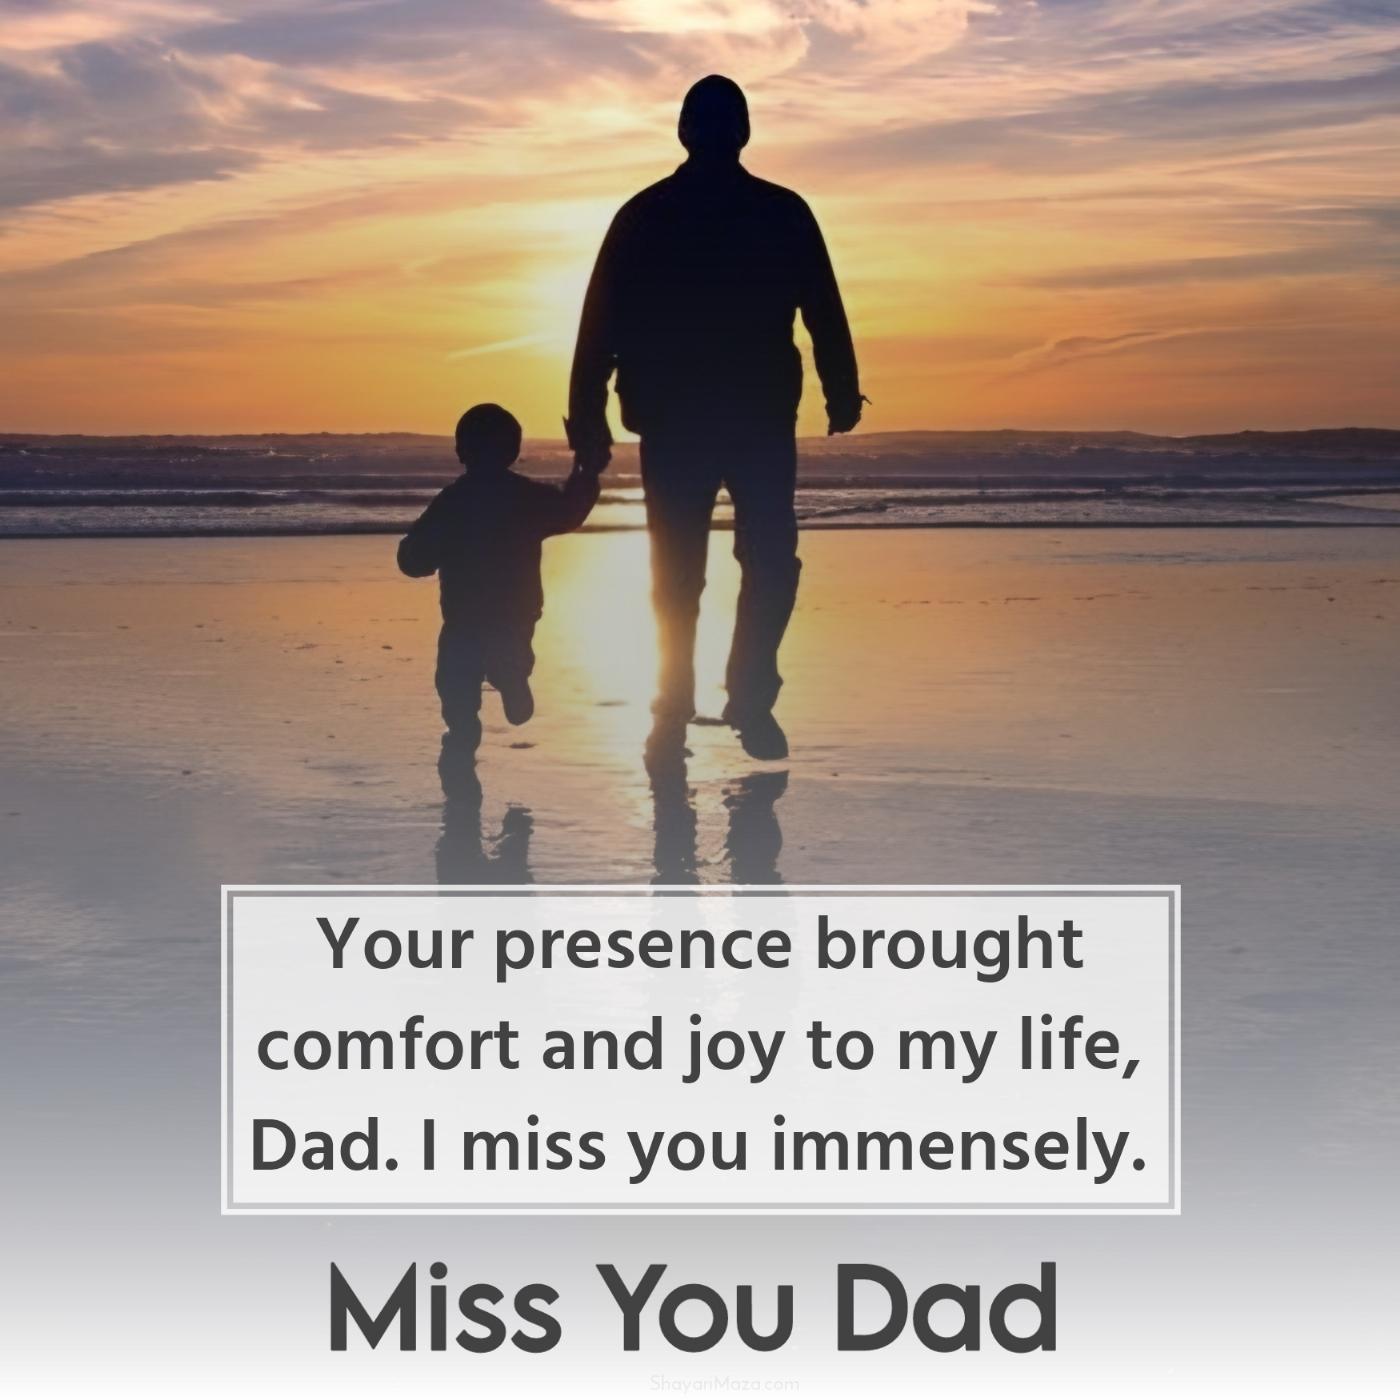 Your presence brought comfort and joy to my life Dad